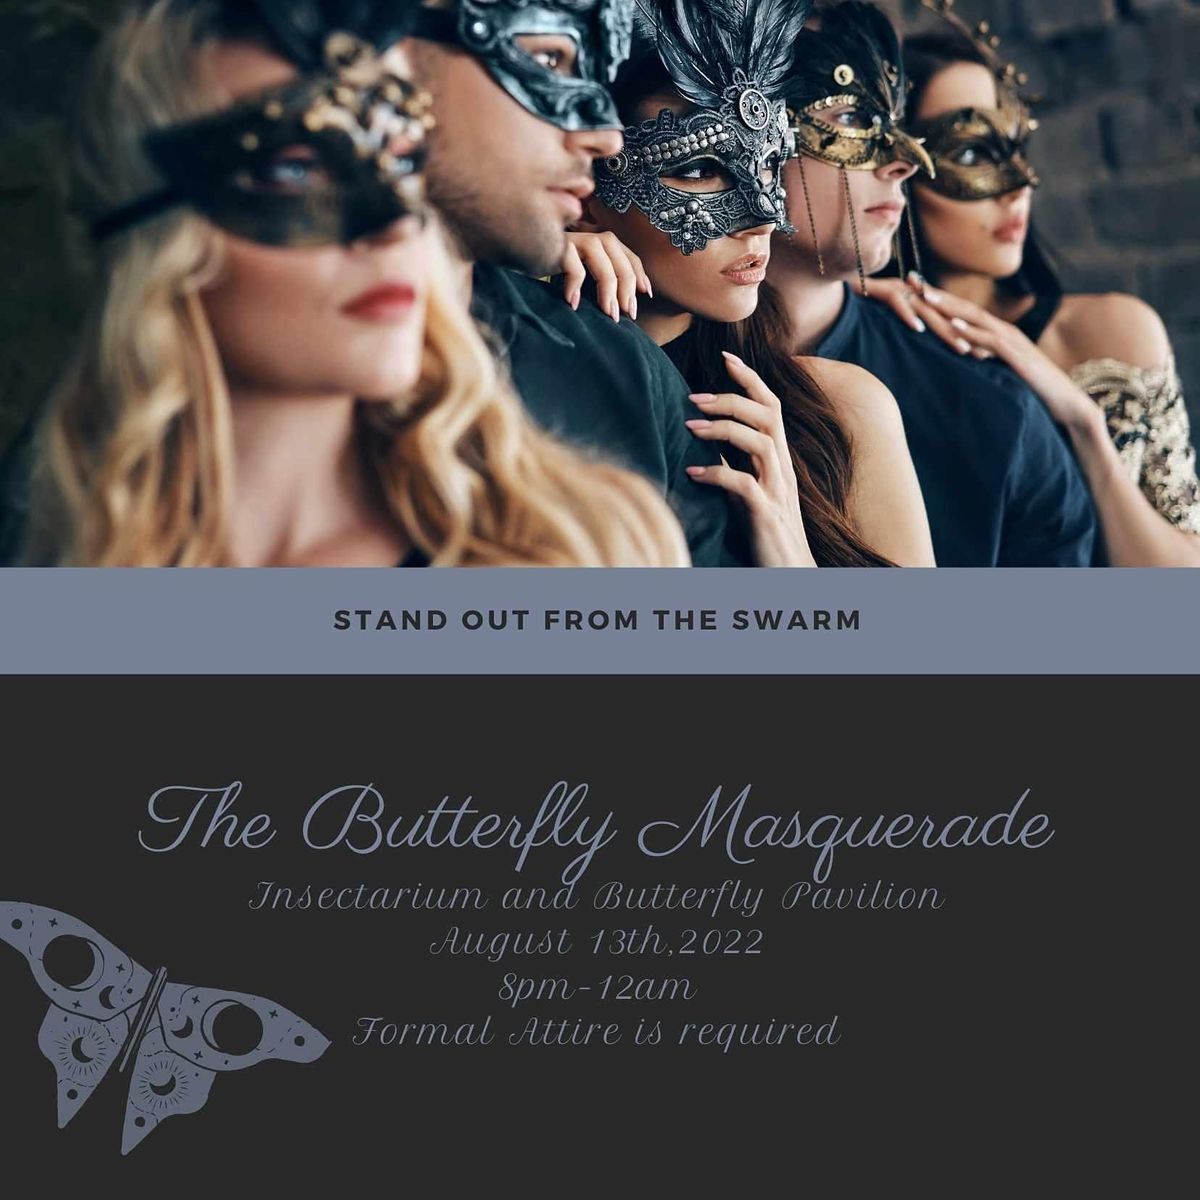 The Butterfly Masquerade